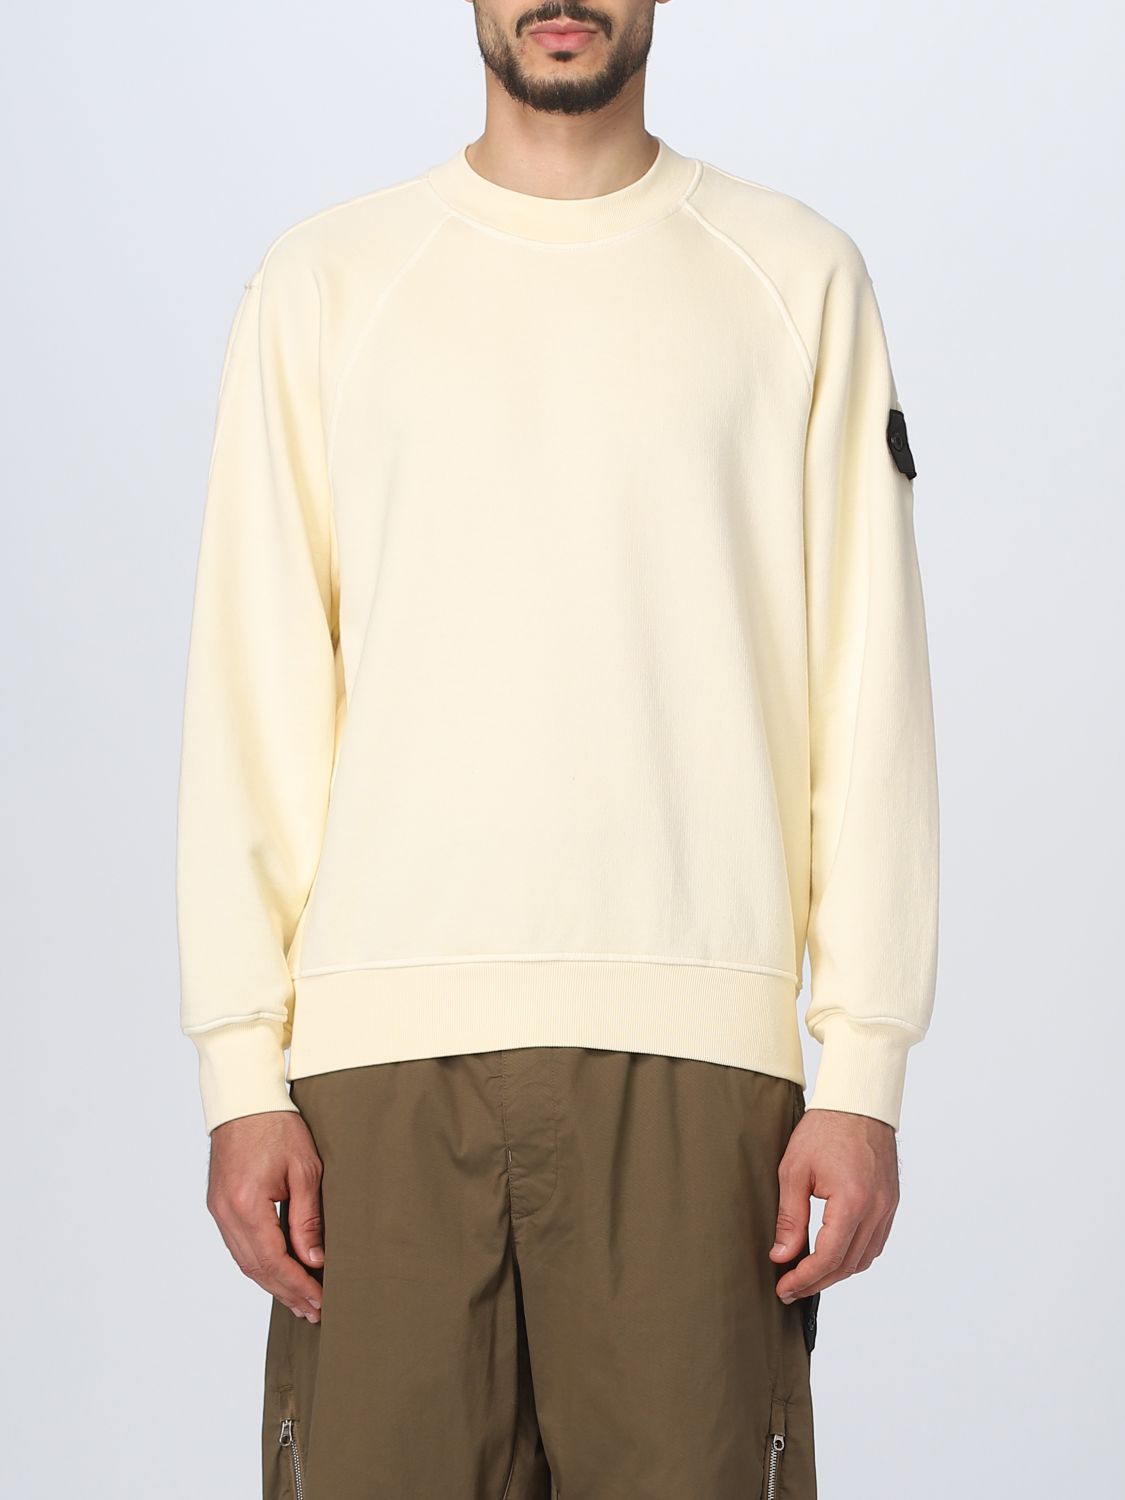 Stone Island Shadow Project Sweater  Men Color Yellow Cream